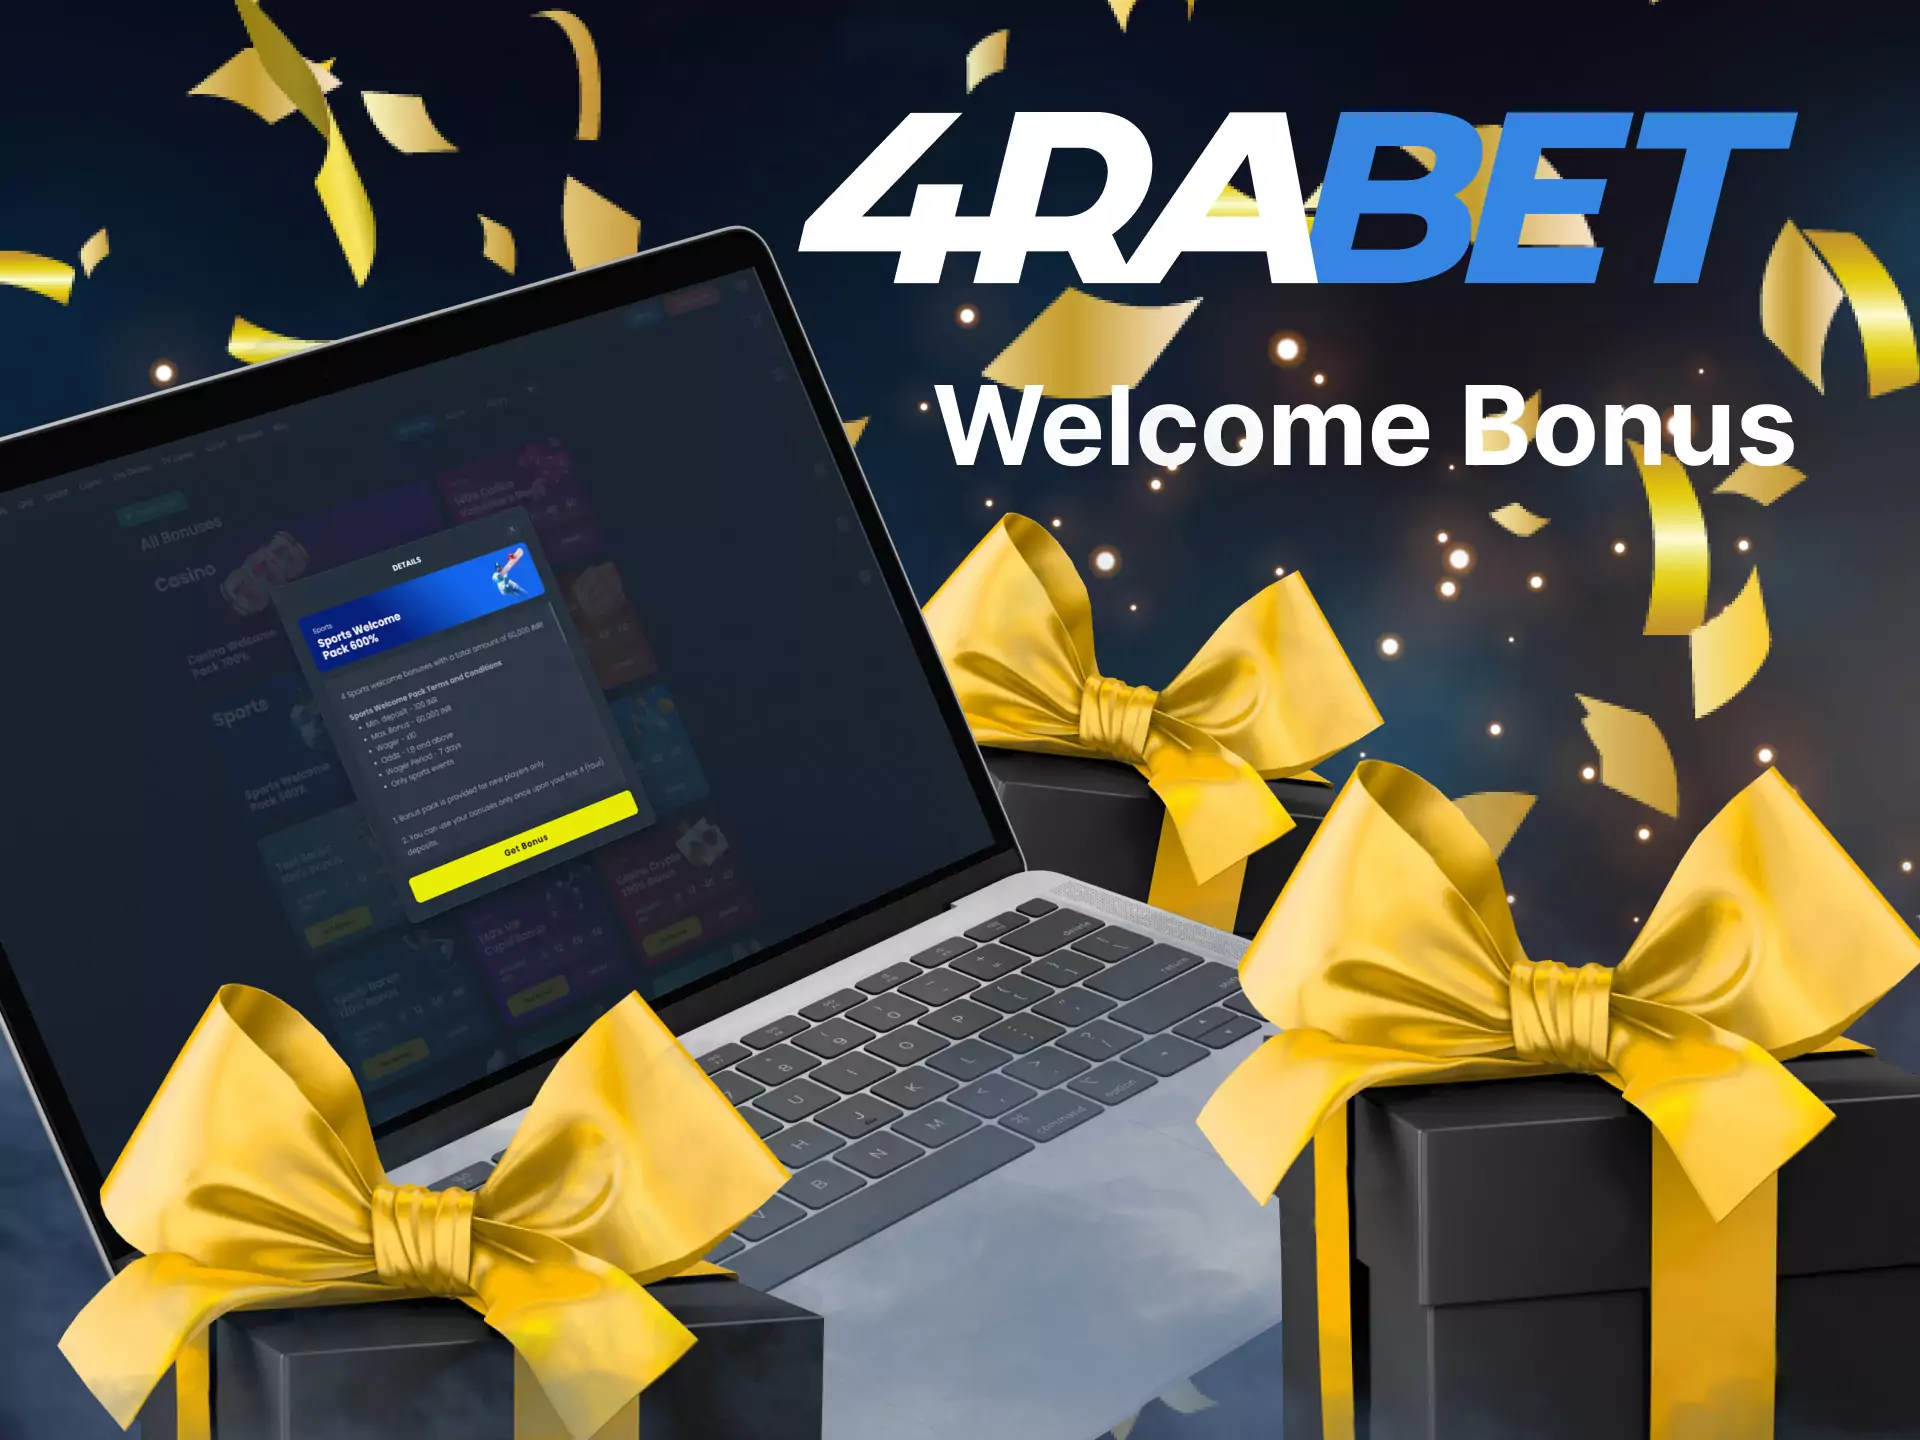 Get a special welcome bonus from 4rabet on your first bet.